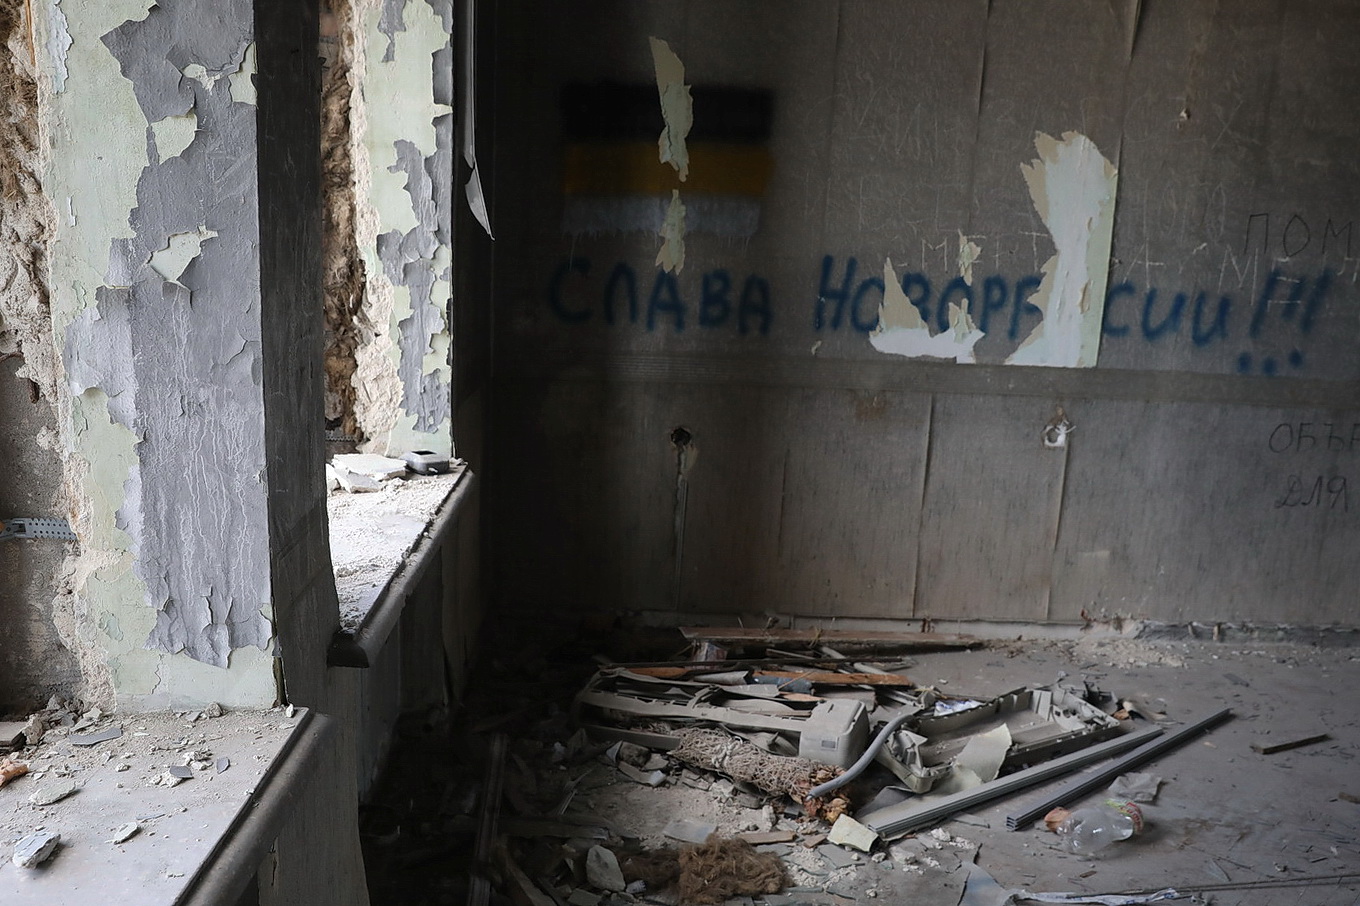 A view inside of the Trade Unions House in Odesa on May 13, 2019, where 42 people were killed by fire or jumped from windows escaping the blaze on May 2, 2014. The words reading “Glory to Novorossiya” (a name used by Russian propaganda for southeastern Ukraine) is seen on the wall covered with soot.